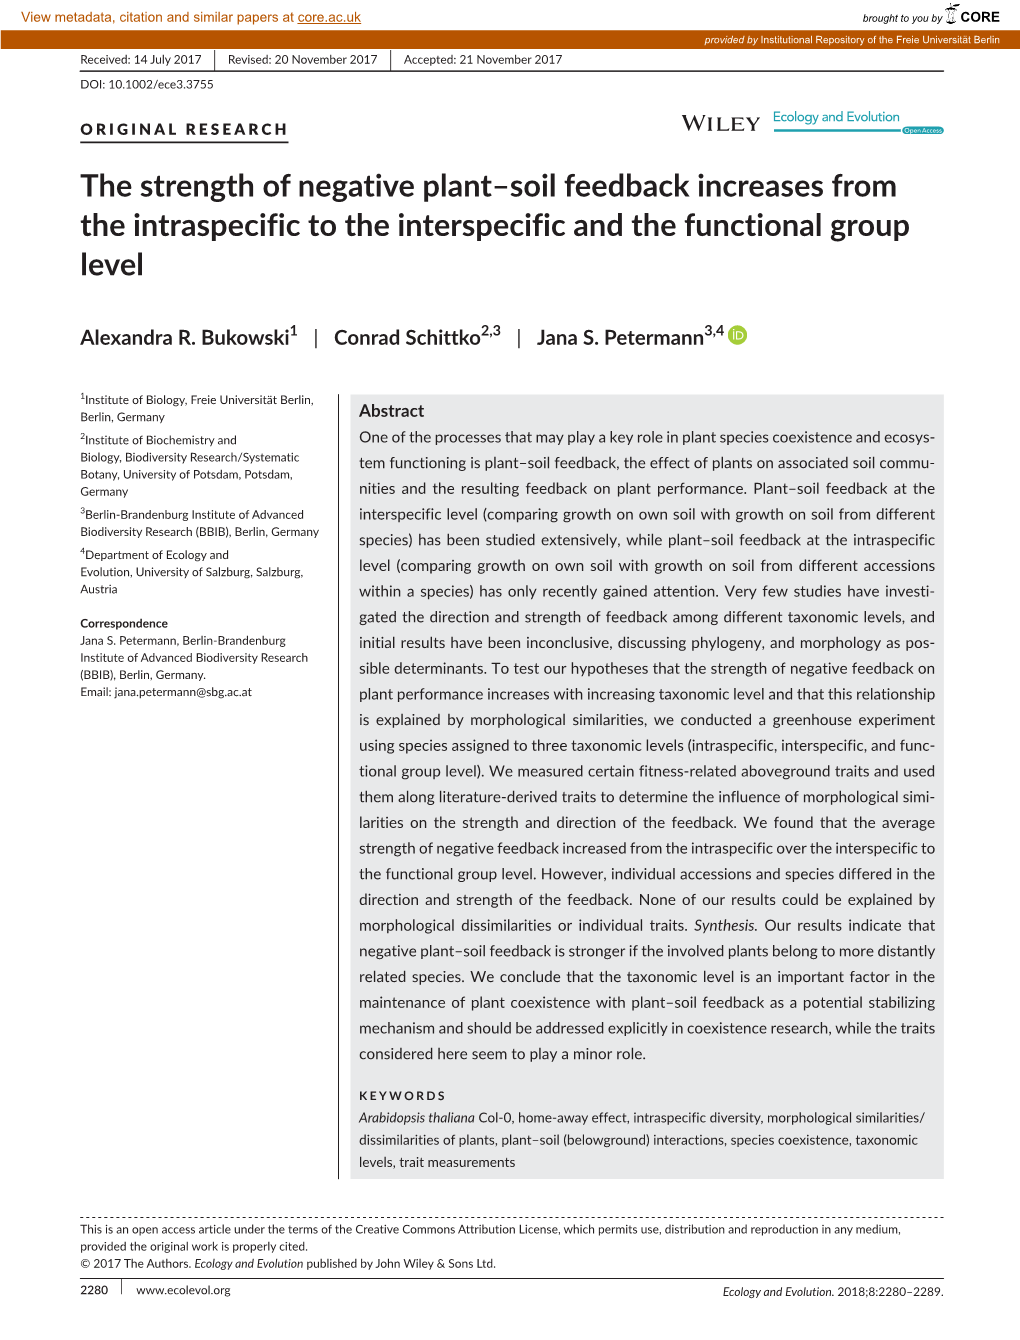 The Strength of Negative Plant–Soil Feedback Increases from the Intraspecific to the Interspecific and the Functional Group Level